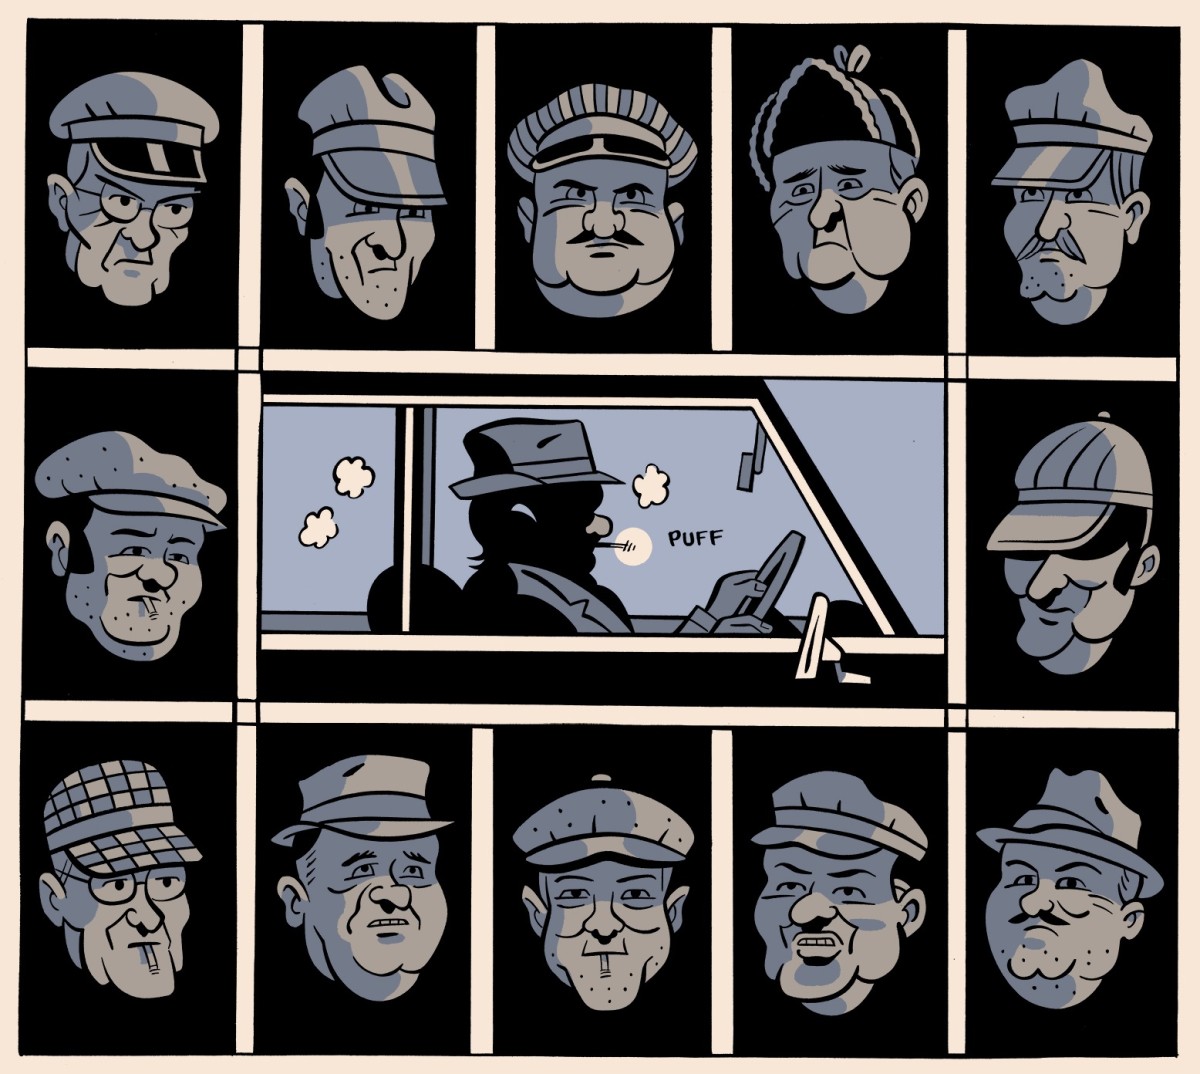 Image of comic strip from book 